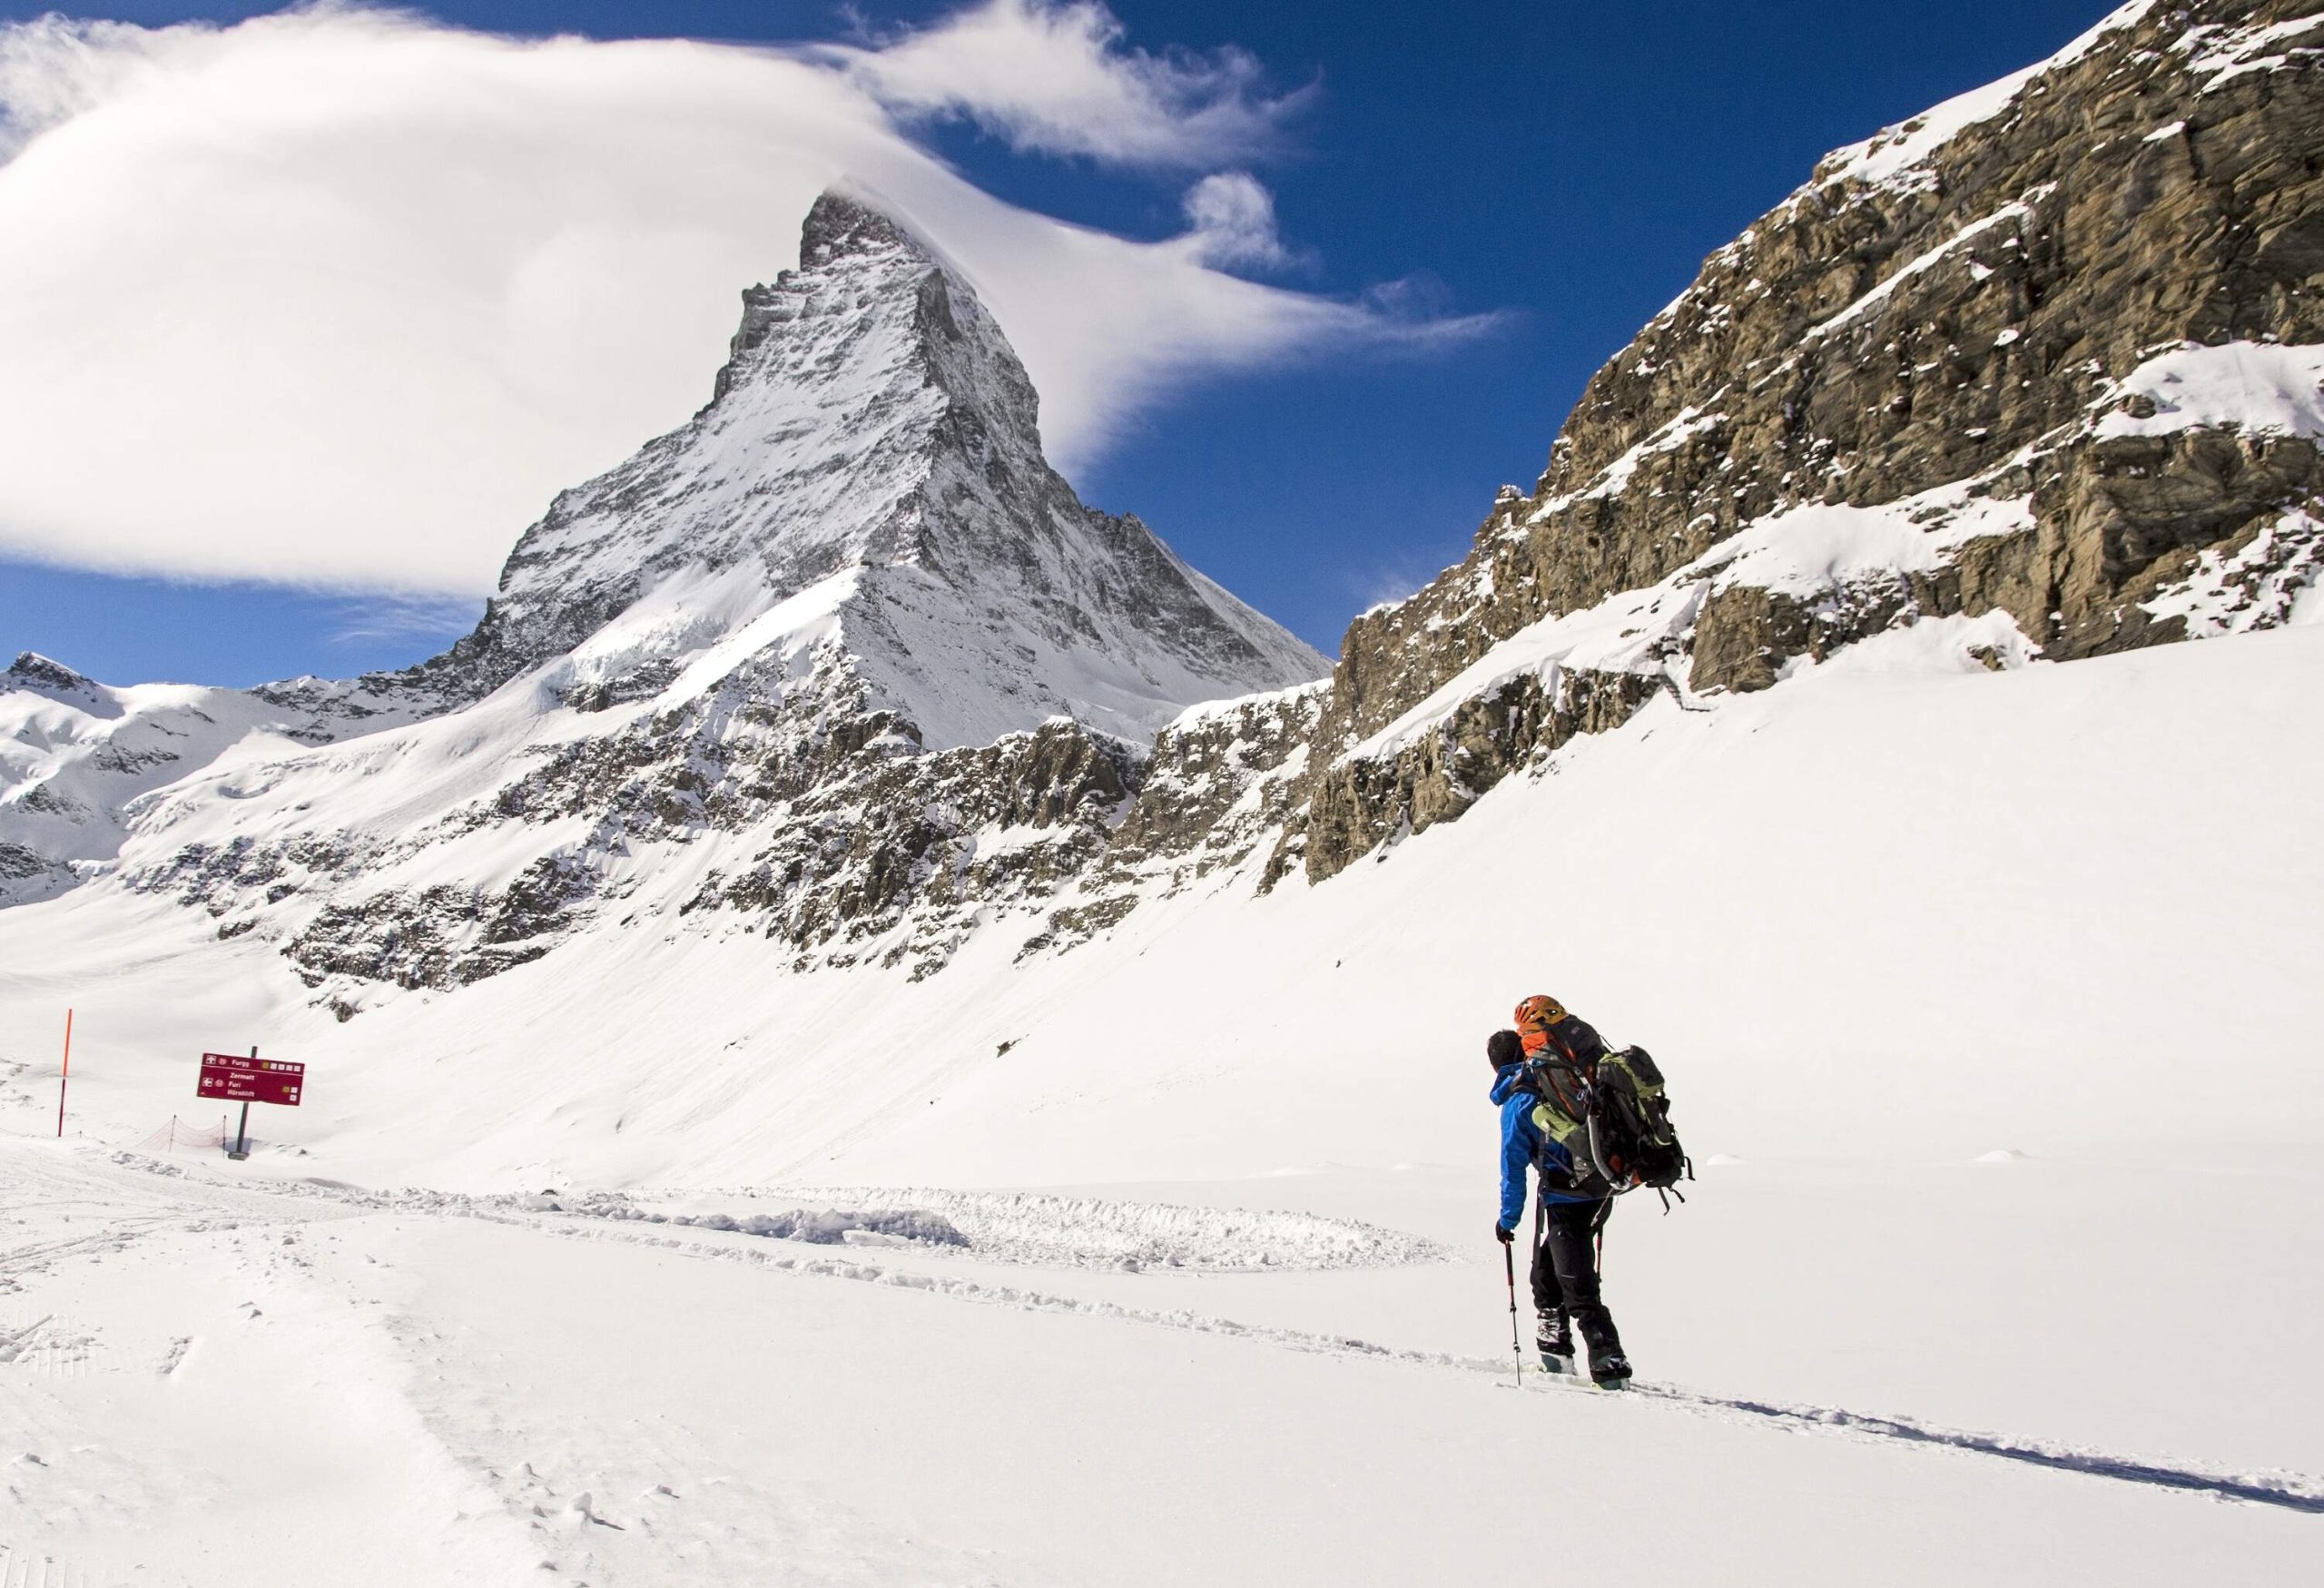 A lone traveller in full winter gear carry a bag while walking across a snow trail along the snow-capped mountain range.